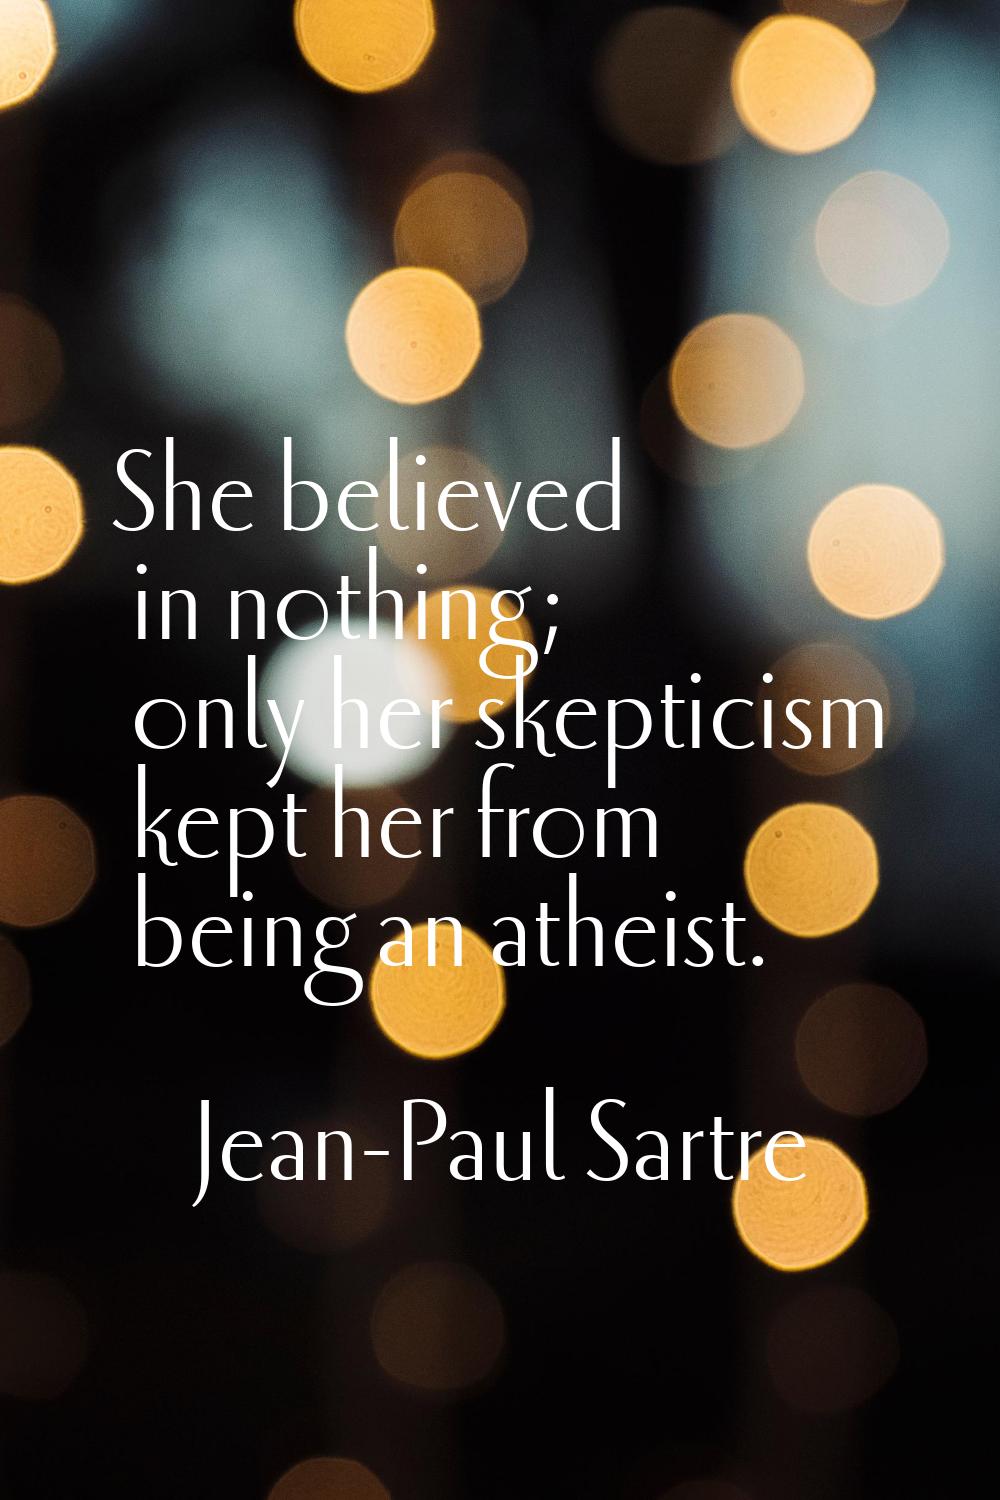 She believed in nothing; only her skepticism kept her from being an atheist.